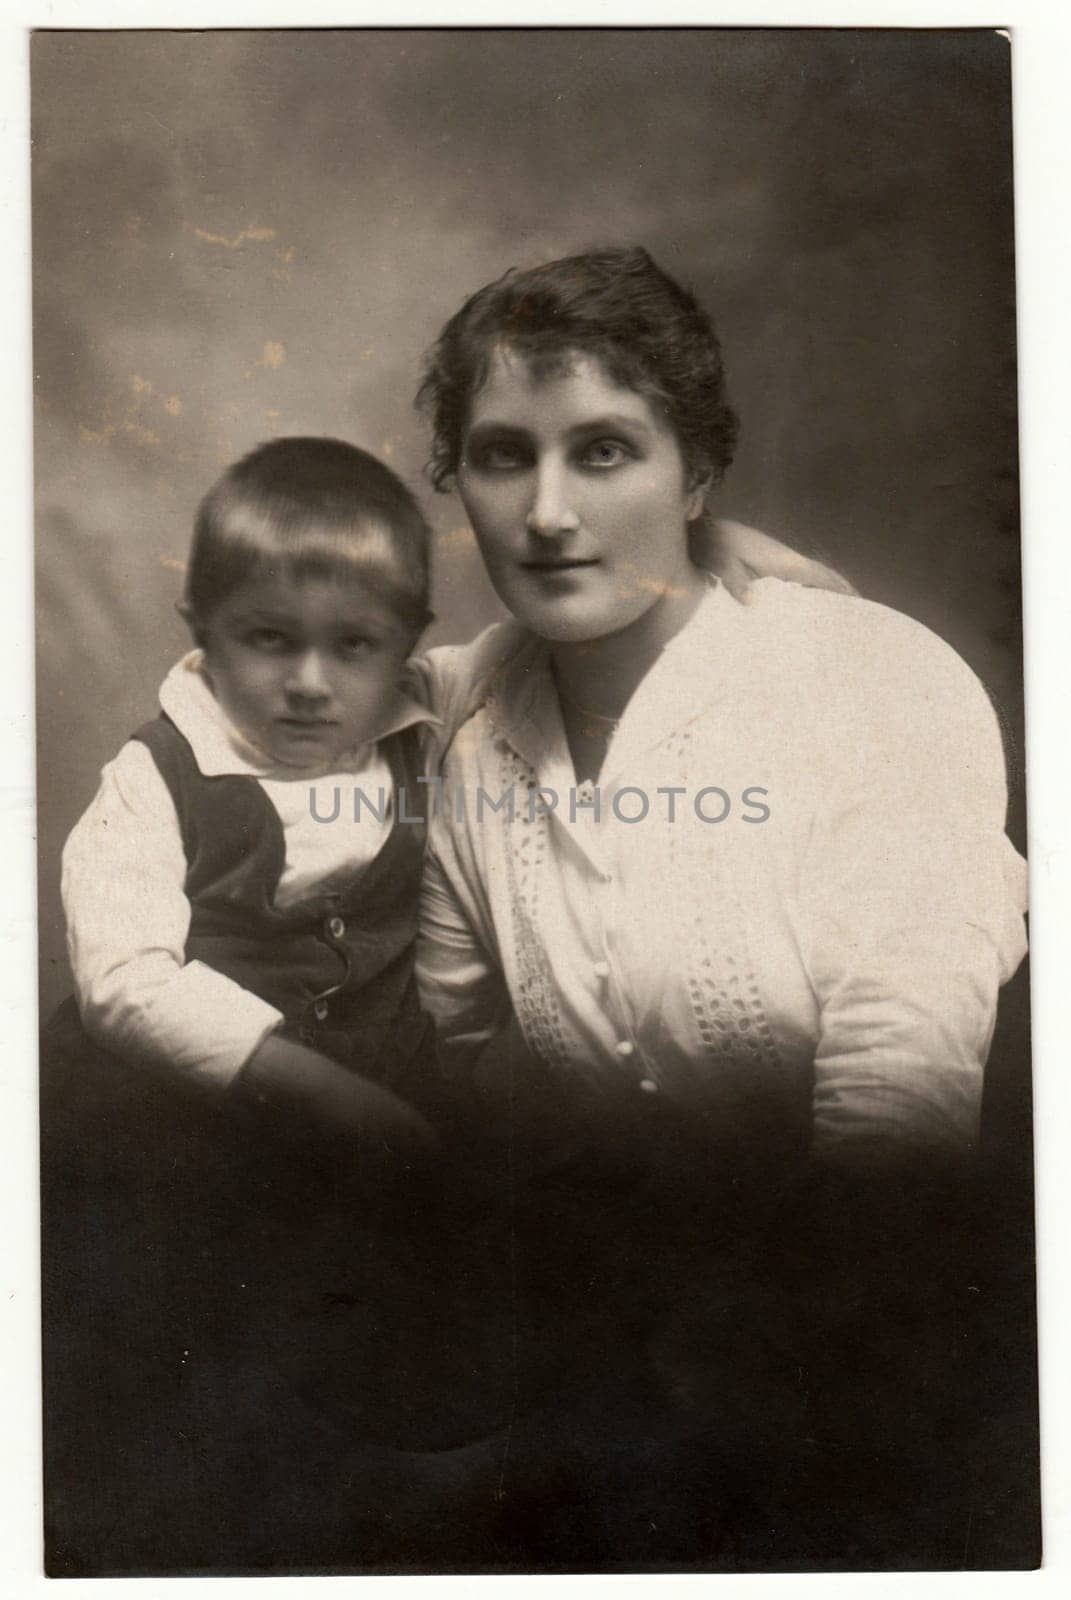 Vintage photo shows a small boy with mother. Retro black and white studio photography. Circa 1920s. by roman_nerud